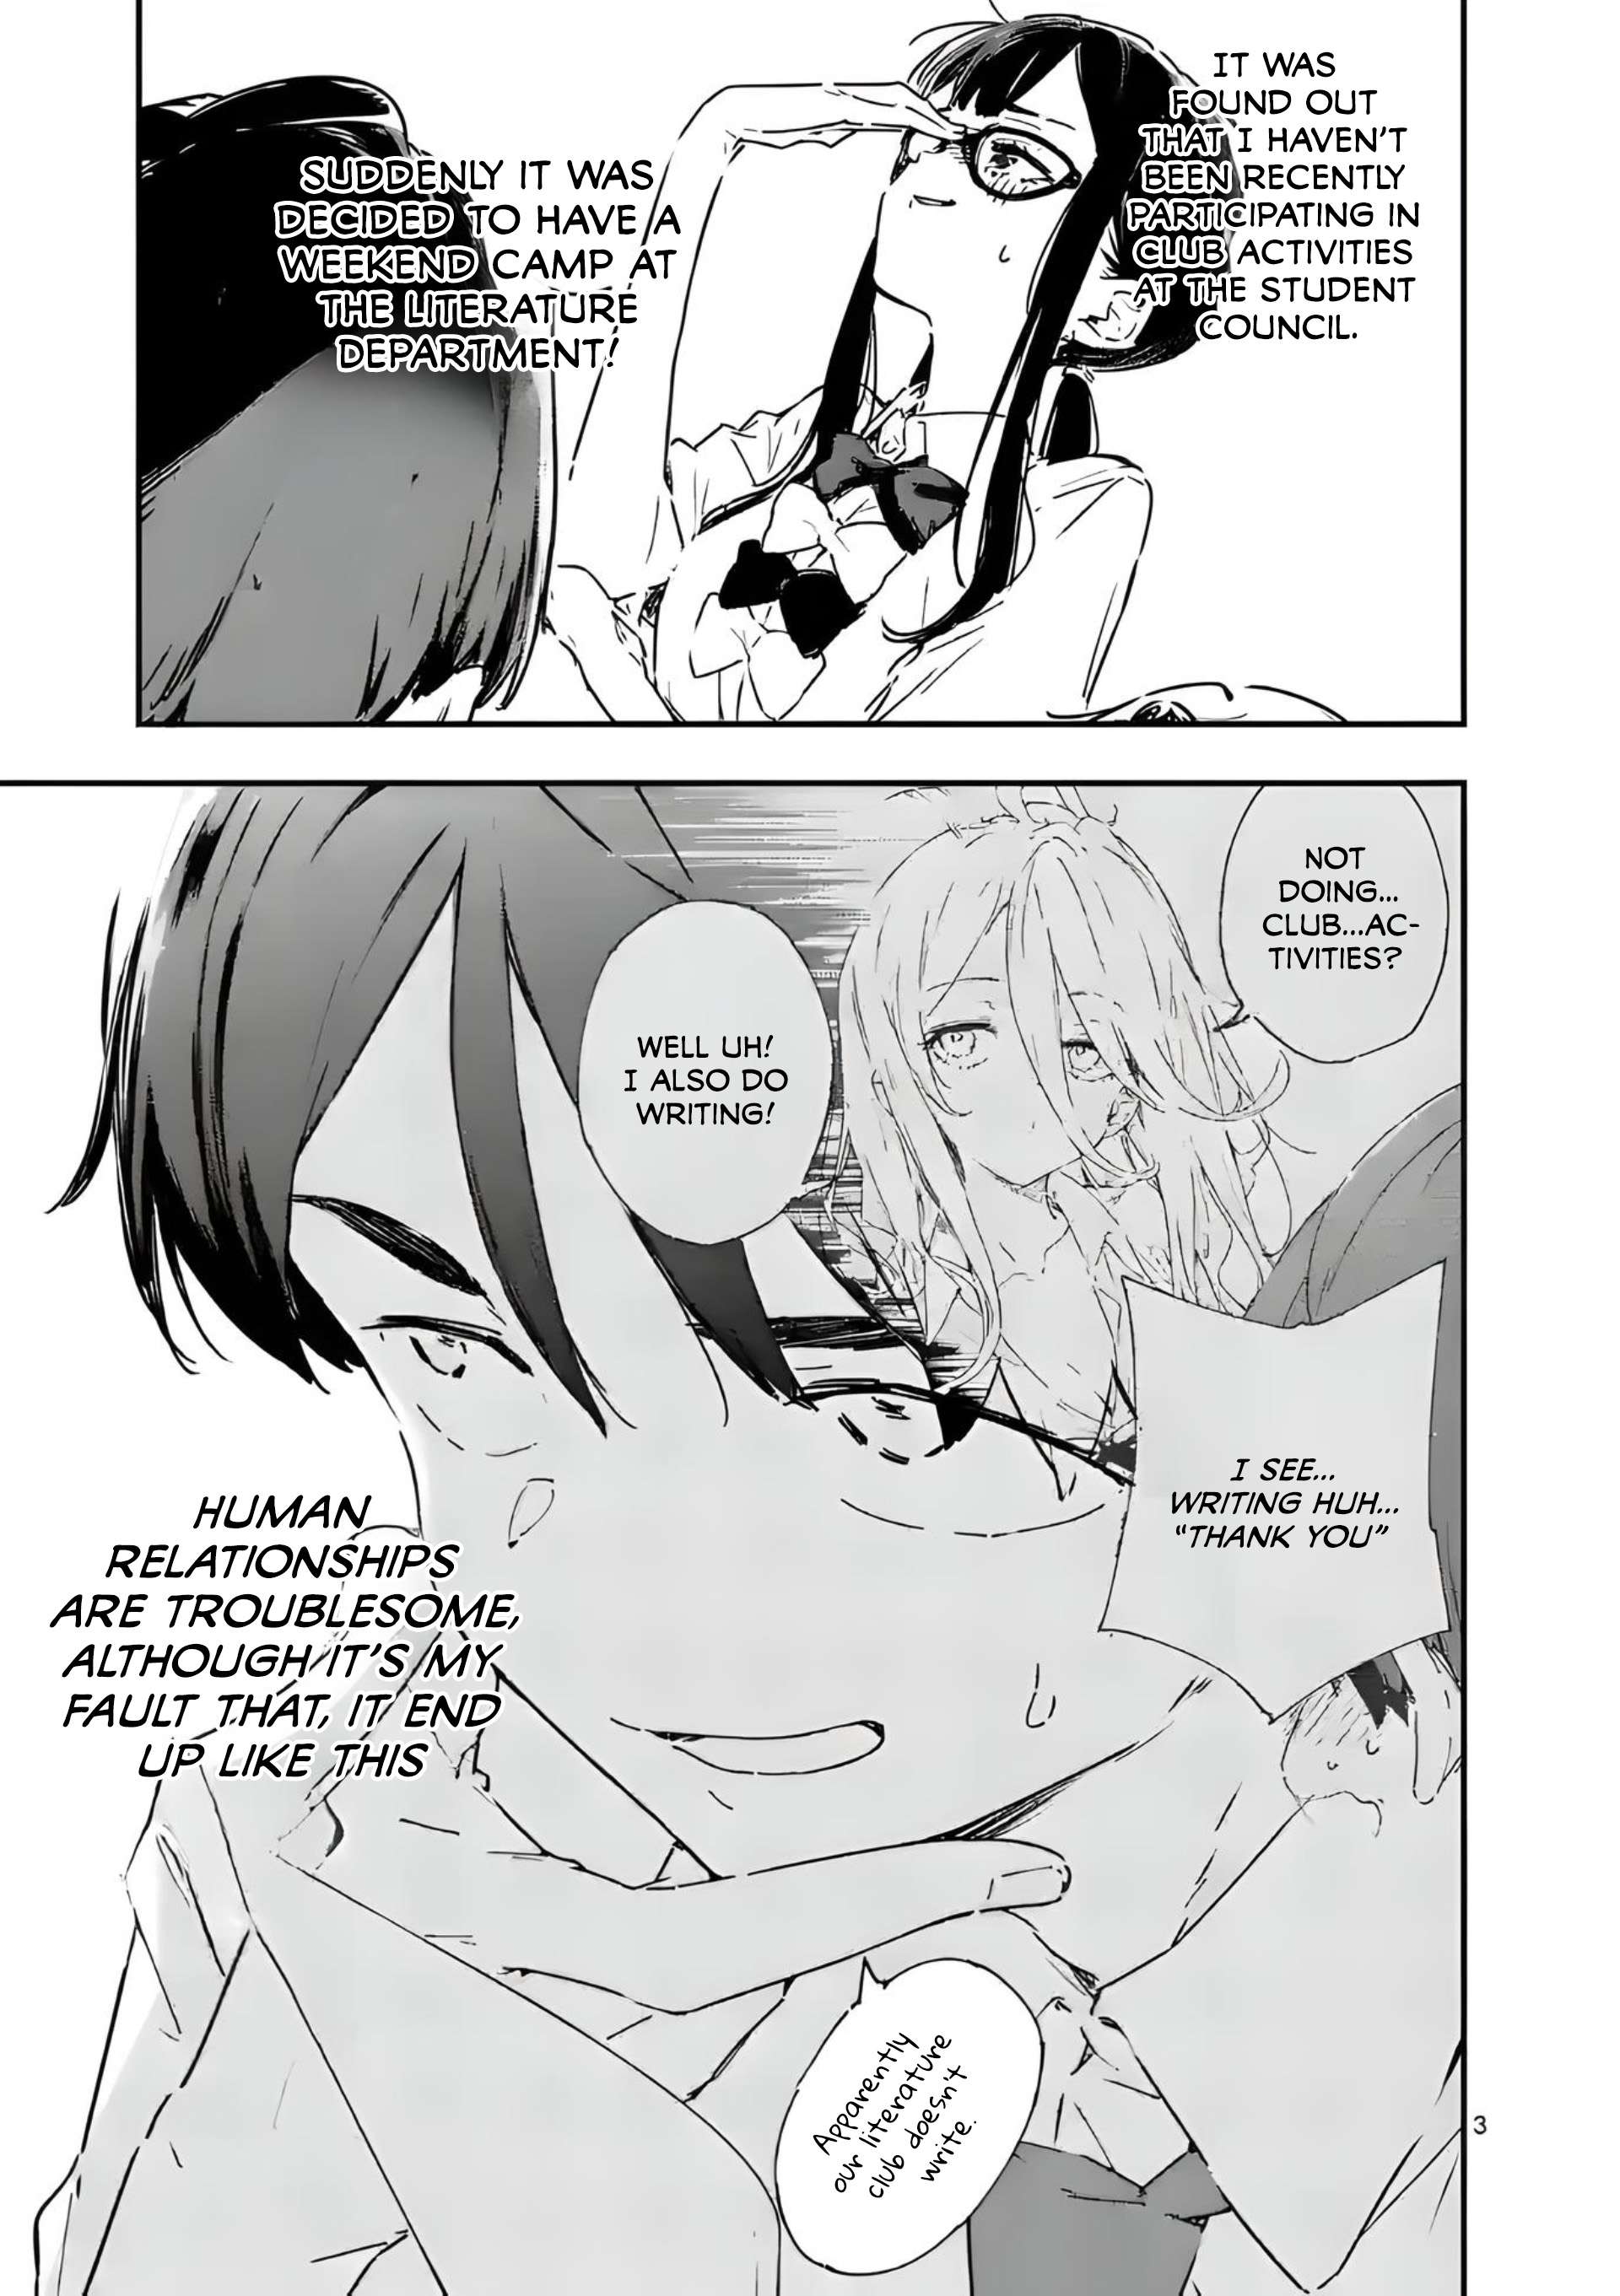 Too Many Losing Heroines - chapter 7.1 - #5